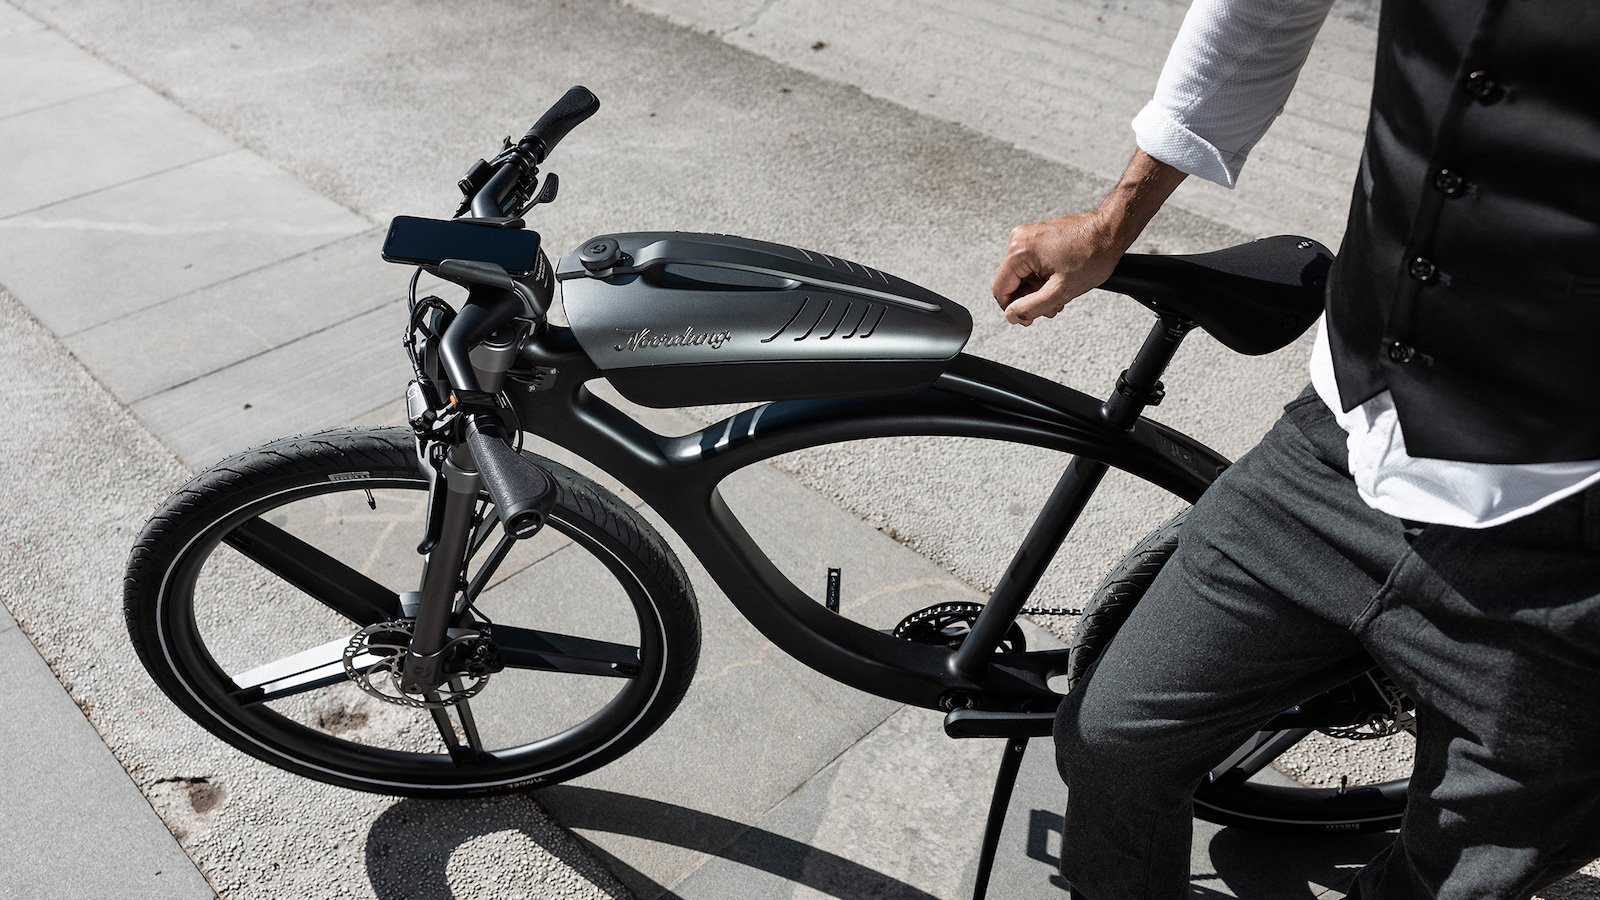 Noordung retro-style carbon-fiber eBike comes with a boombox and air pollution sensors